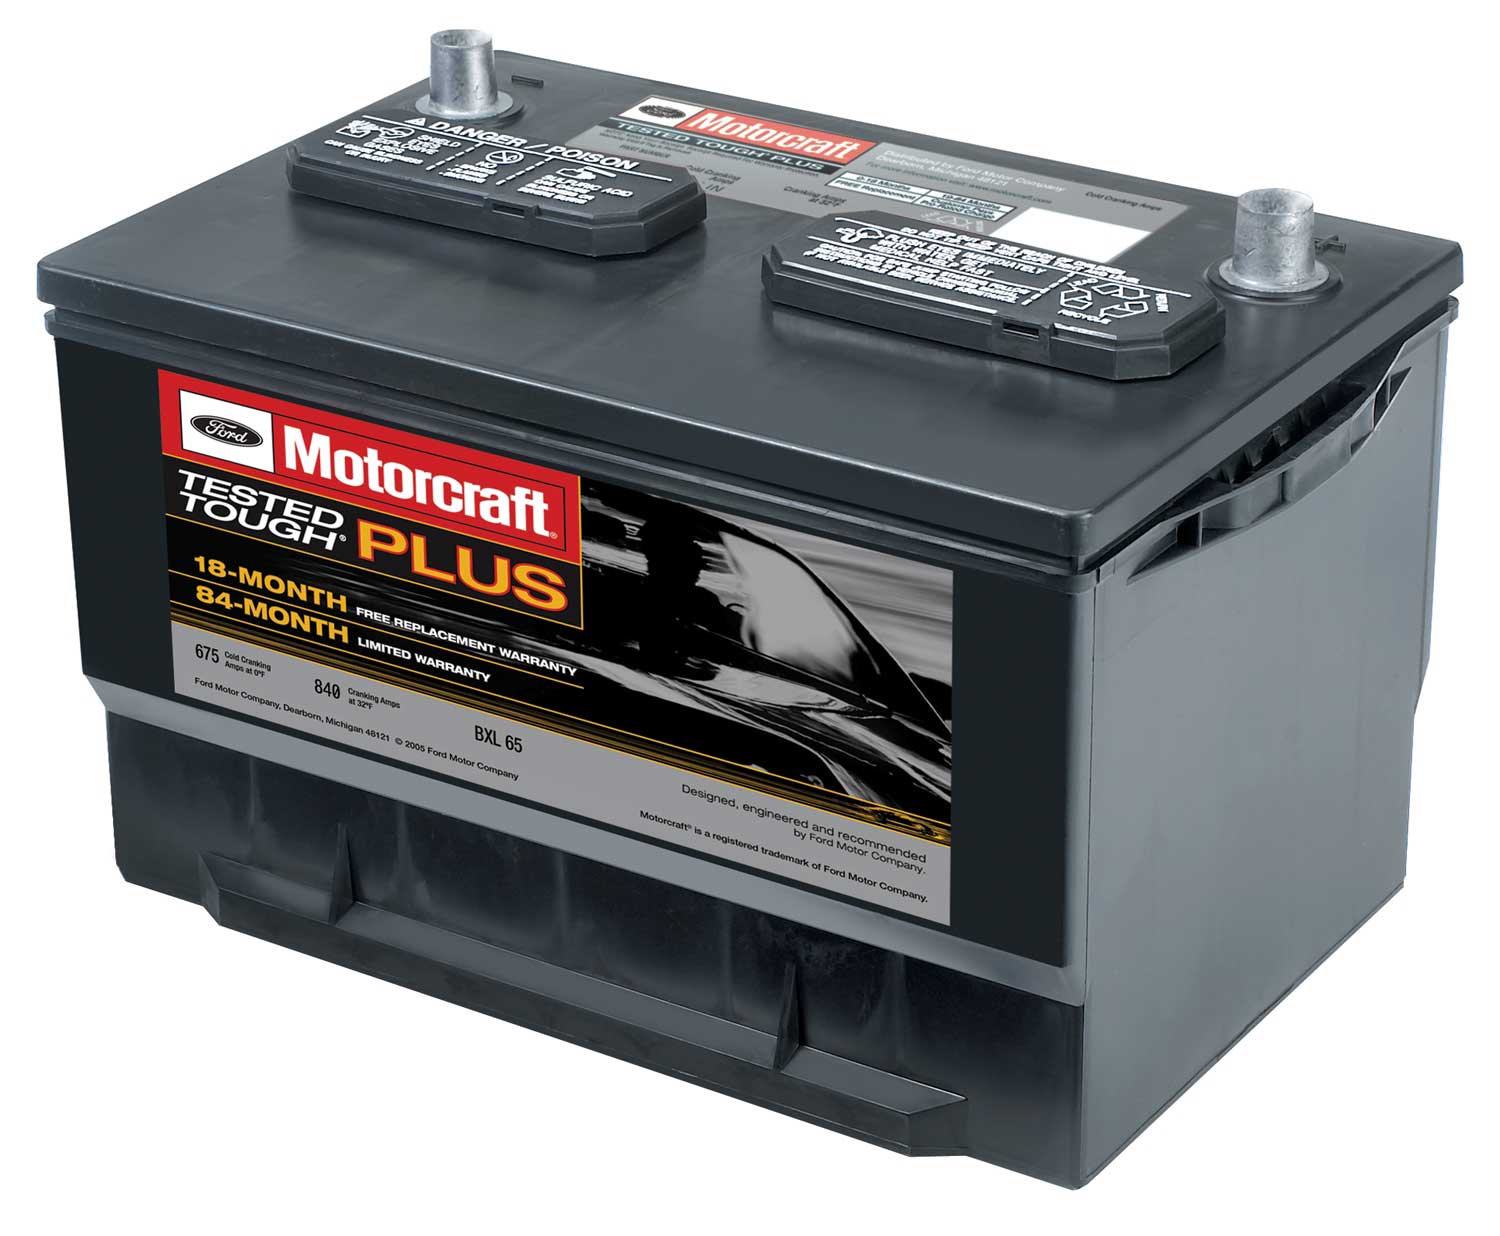 Ford motorcraft battery review #4